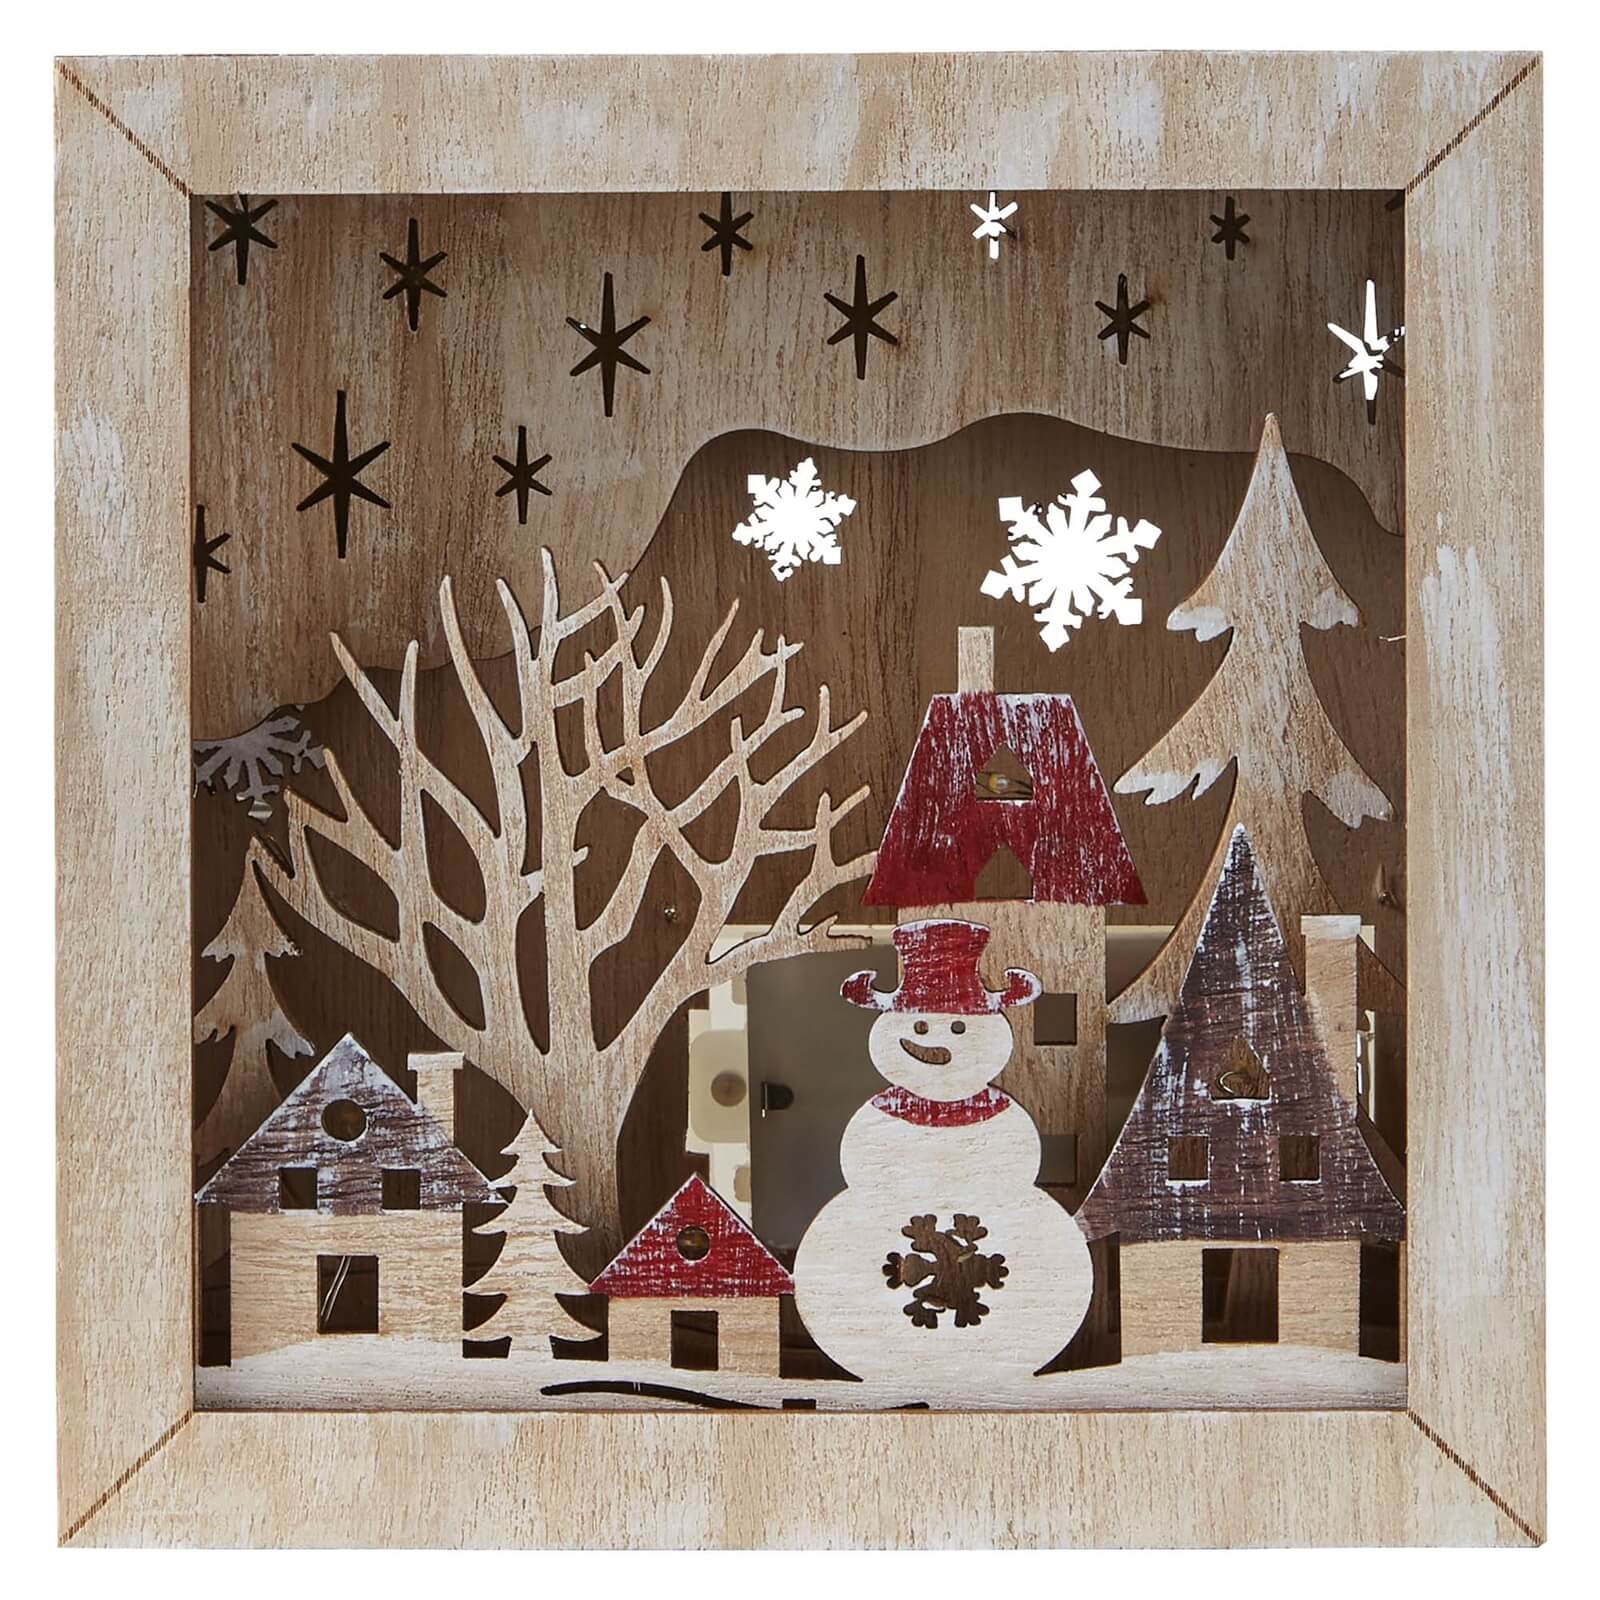 Wooden Snowman Scene Light Up Decoration (Battery Operated)